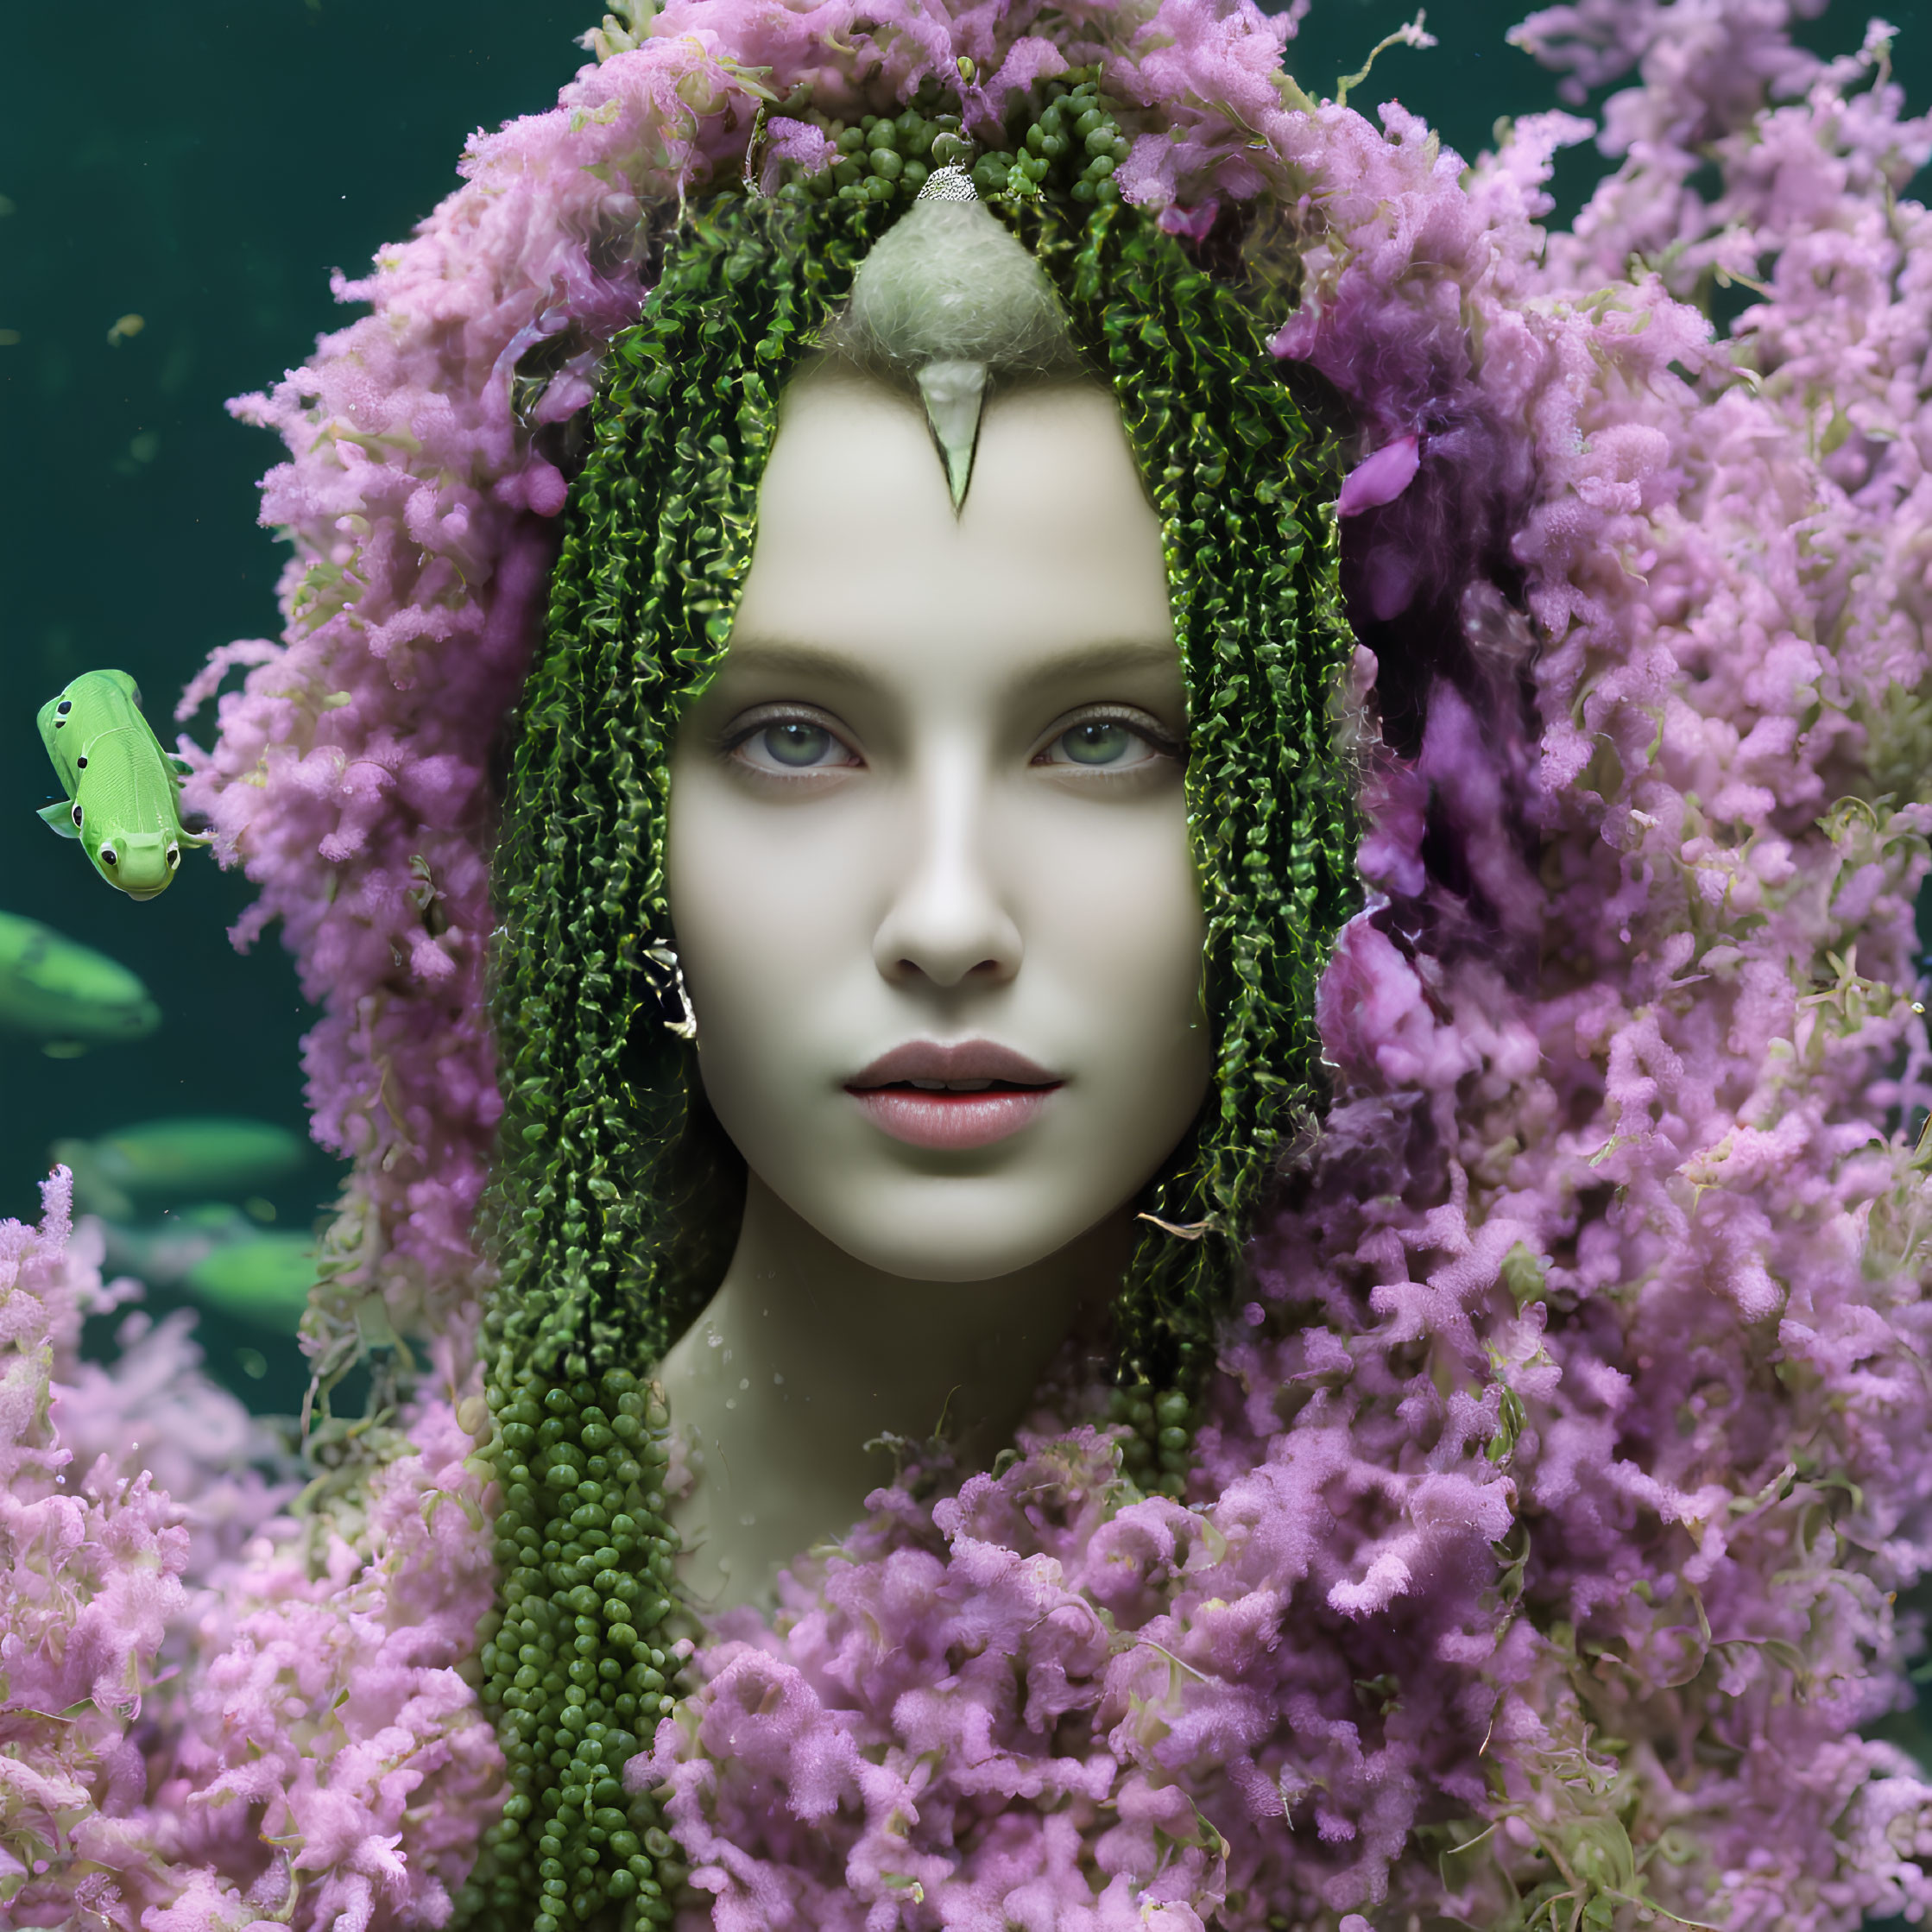 Vibrant surreal portrait with female face and green creature in flora